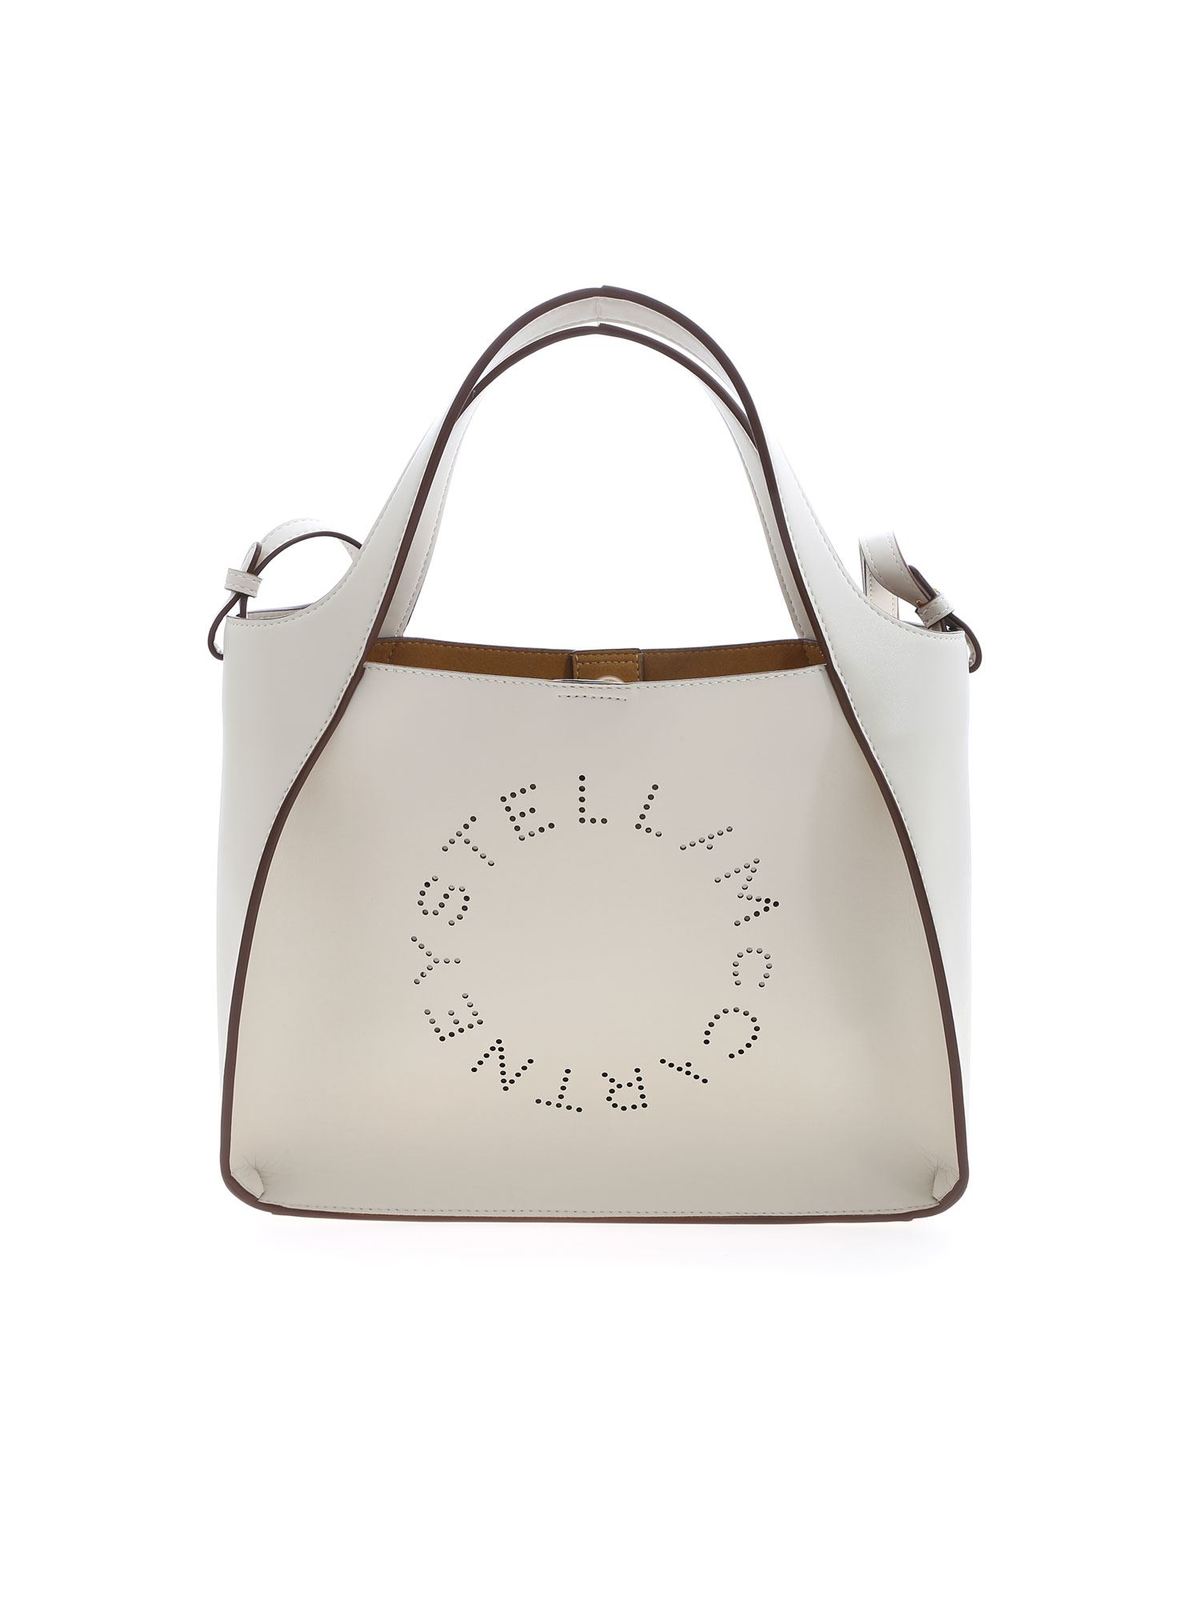 Totes bags Stella Mccartney - Drilled logo Tote bag in cream color ...